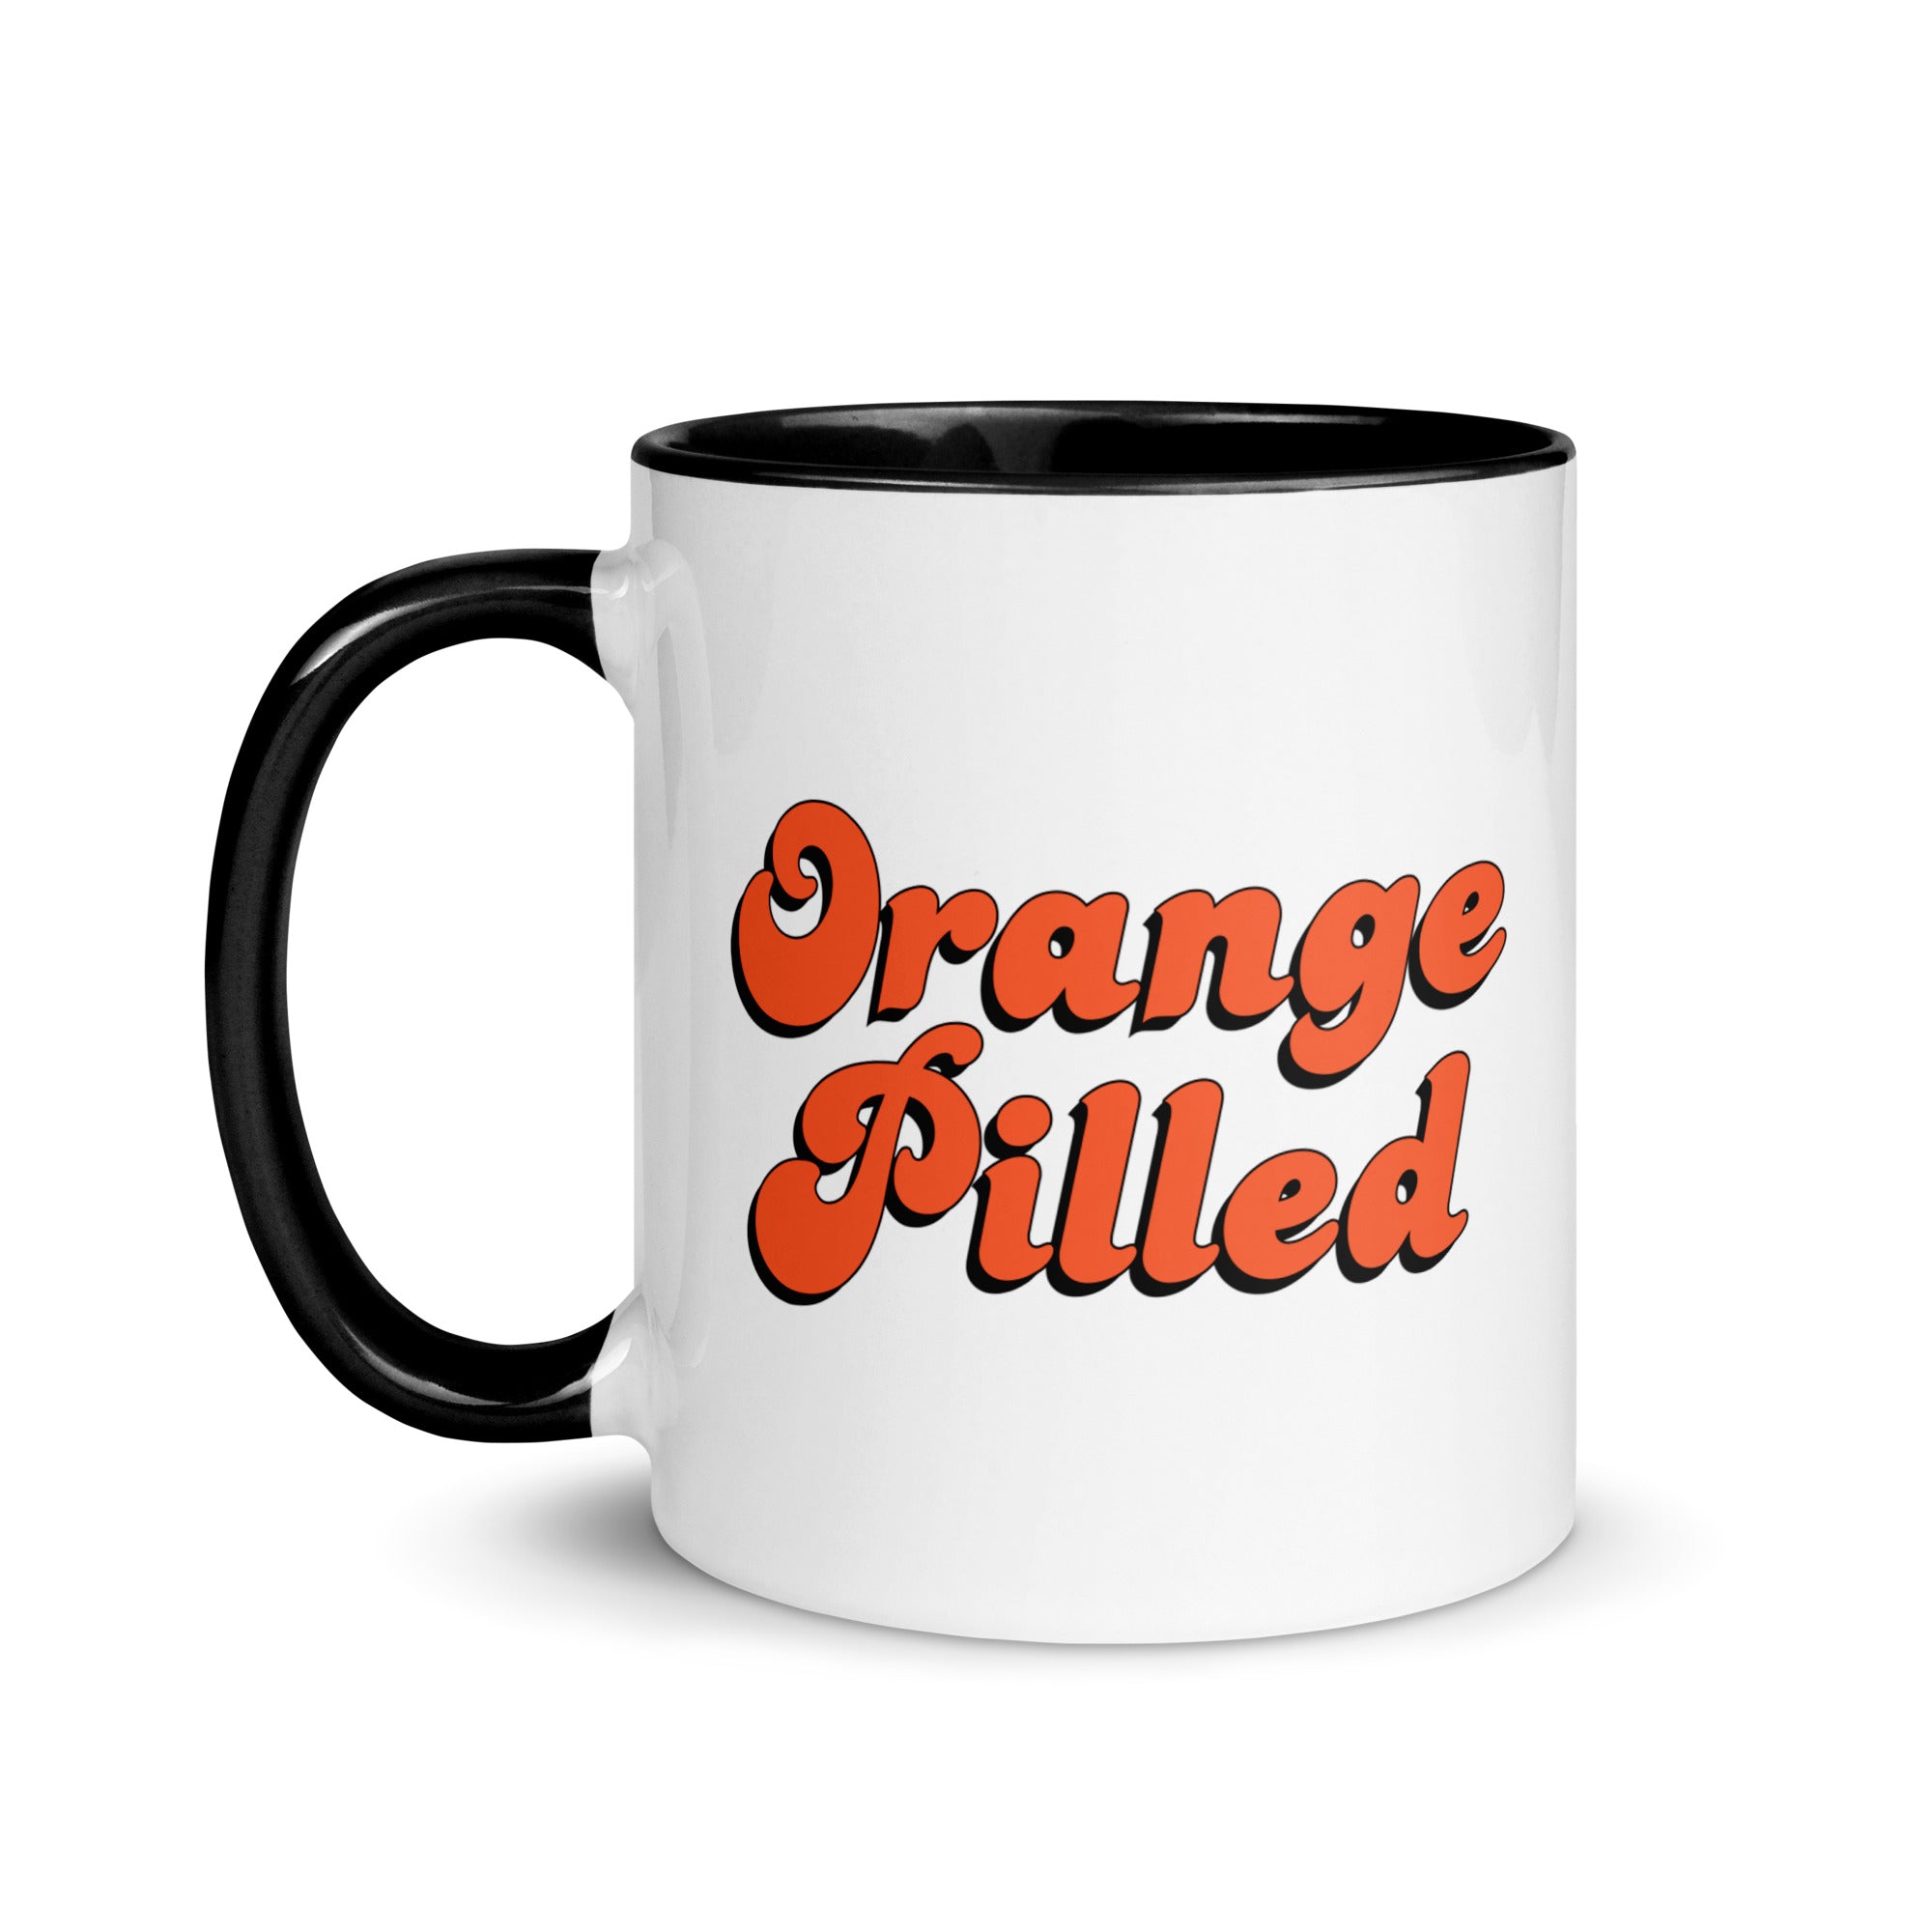 Bitcoin Gift Ideas - The Orange Pilled Mug features an eye-catching Bitcoin-themed design on a white glossy mug with black interior and handle. Left handle view.